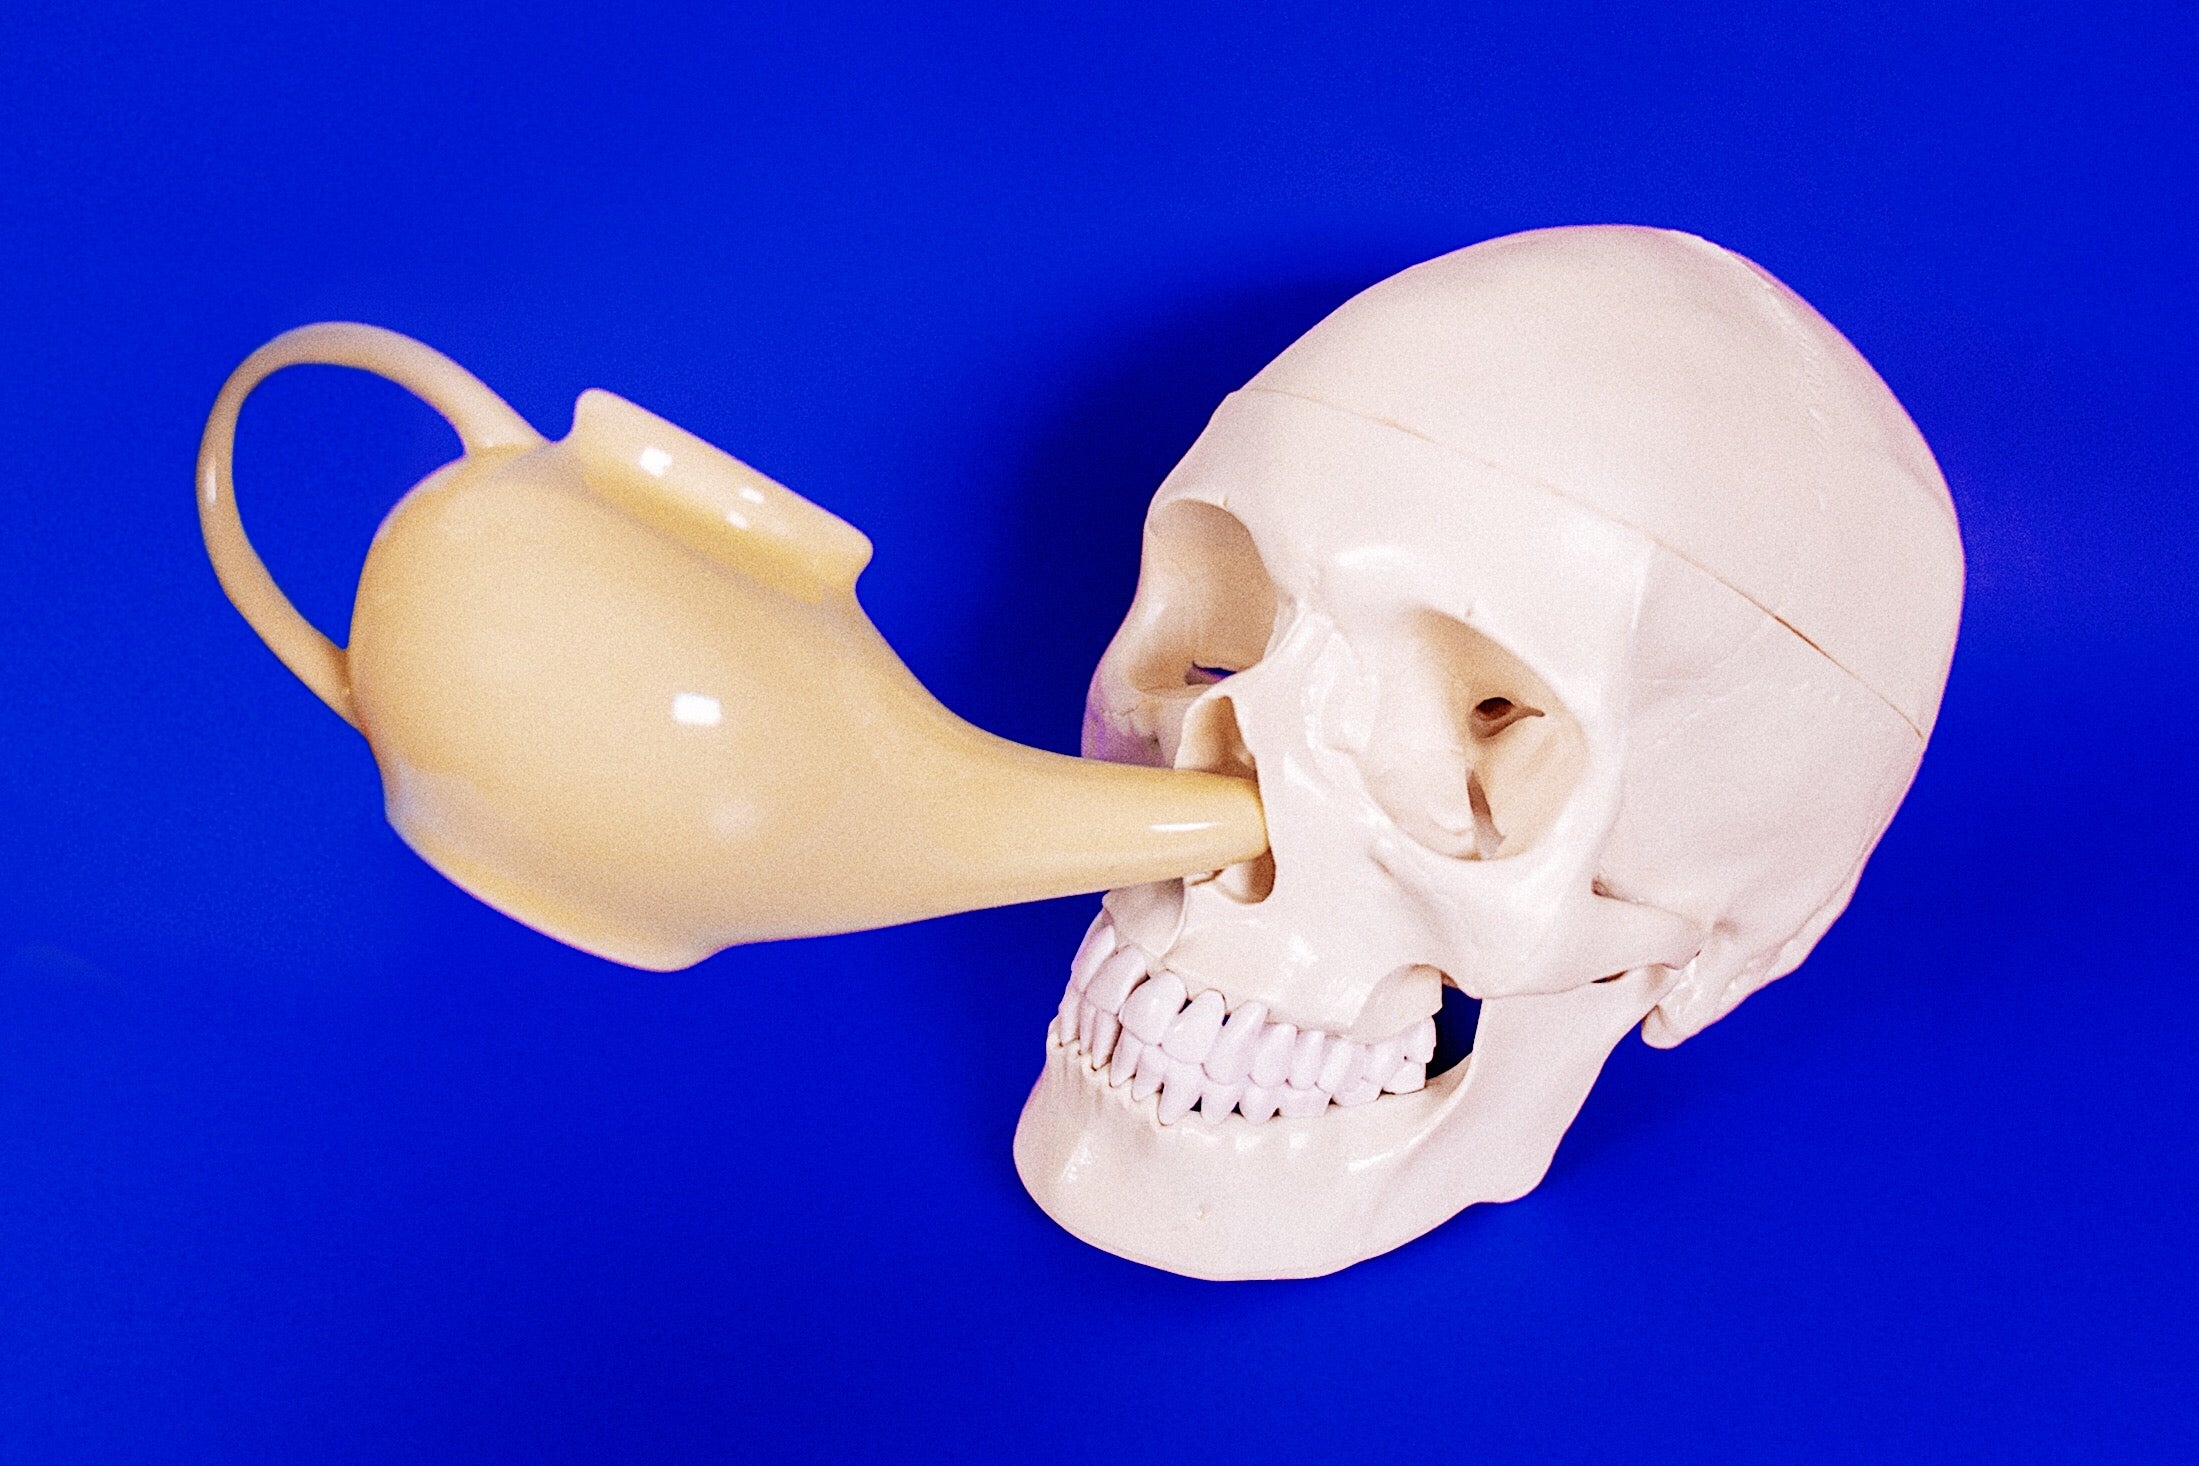 Neti pot irrigating the nasal passages of a human skull on a blue background.